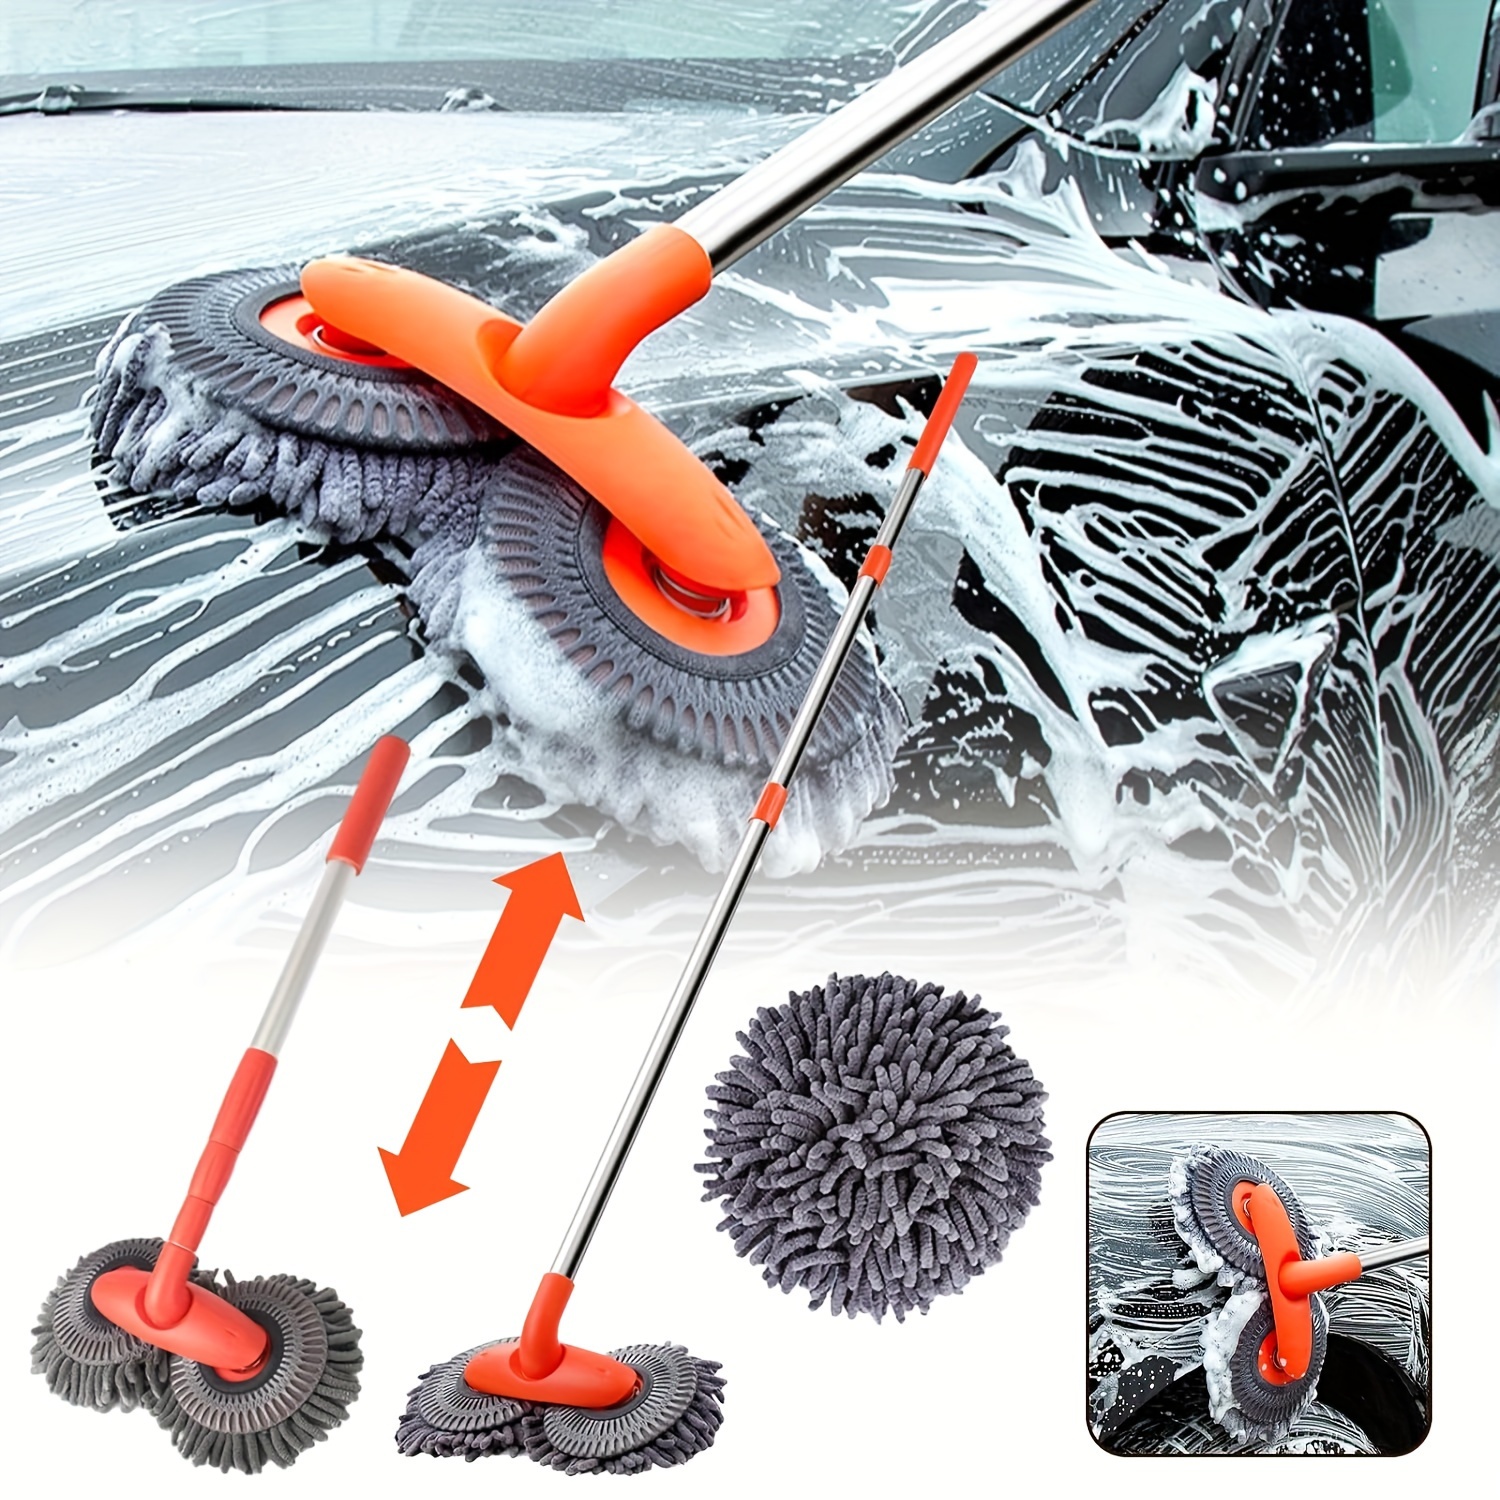 

1pc Car Wash Brush With Long Handle, Microfiber Car Wash Mop Mitt, Long Handle Car Cleaning Kit Brush, Windshield Cleaning Tool, Car Brushes For Washing Exterior, Duster Washing Car Tools Accessories